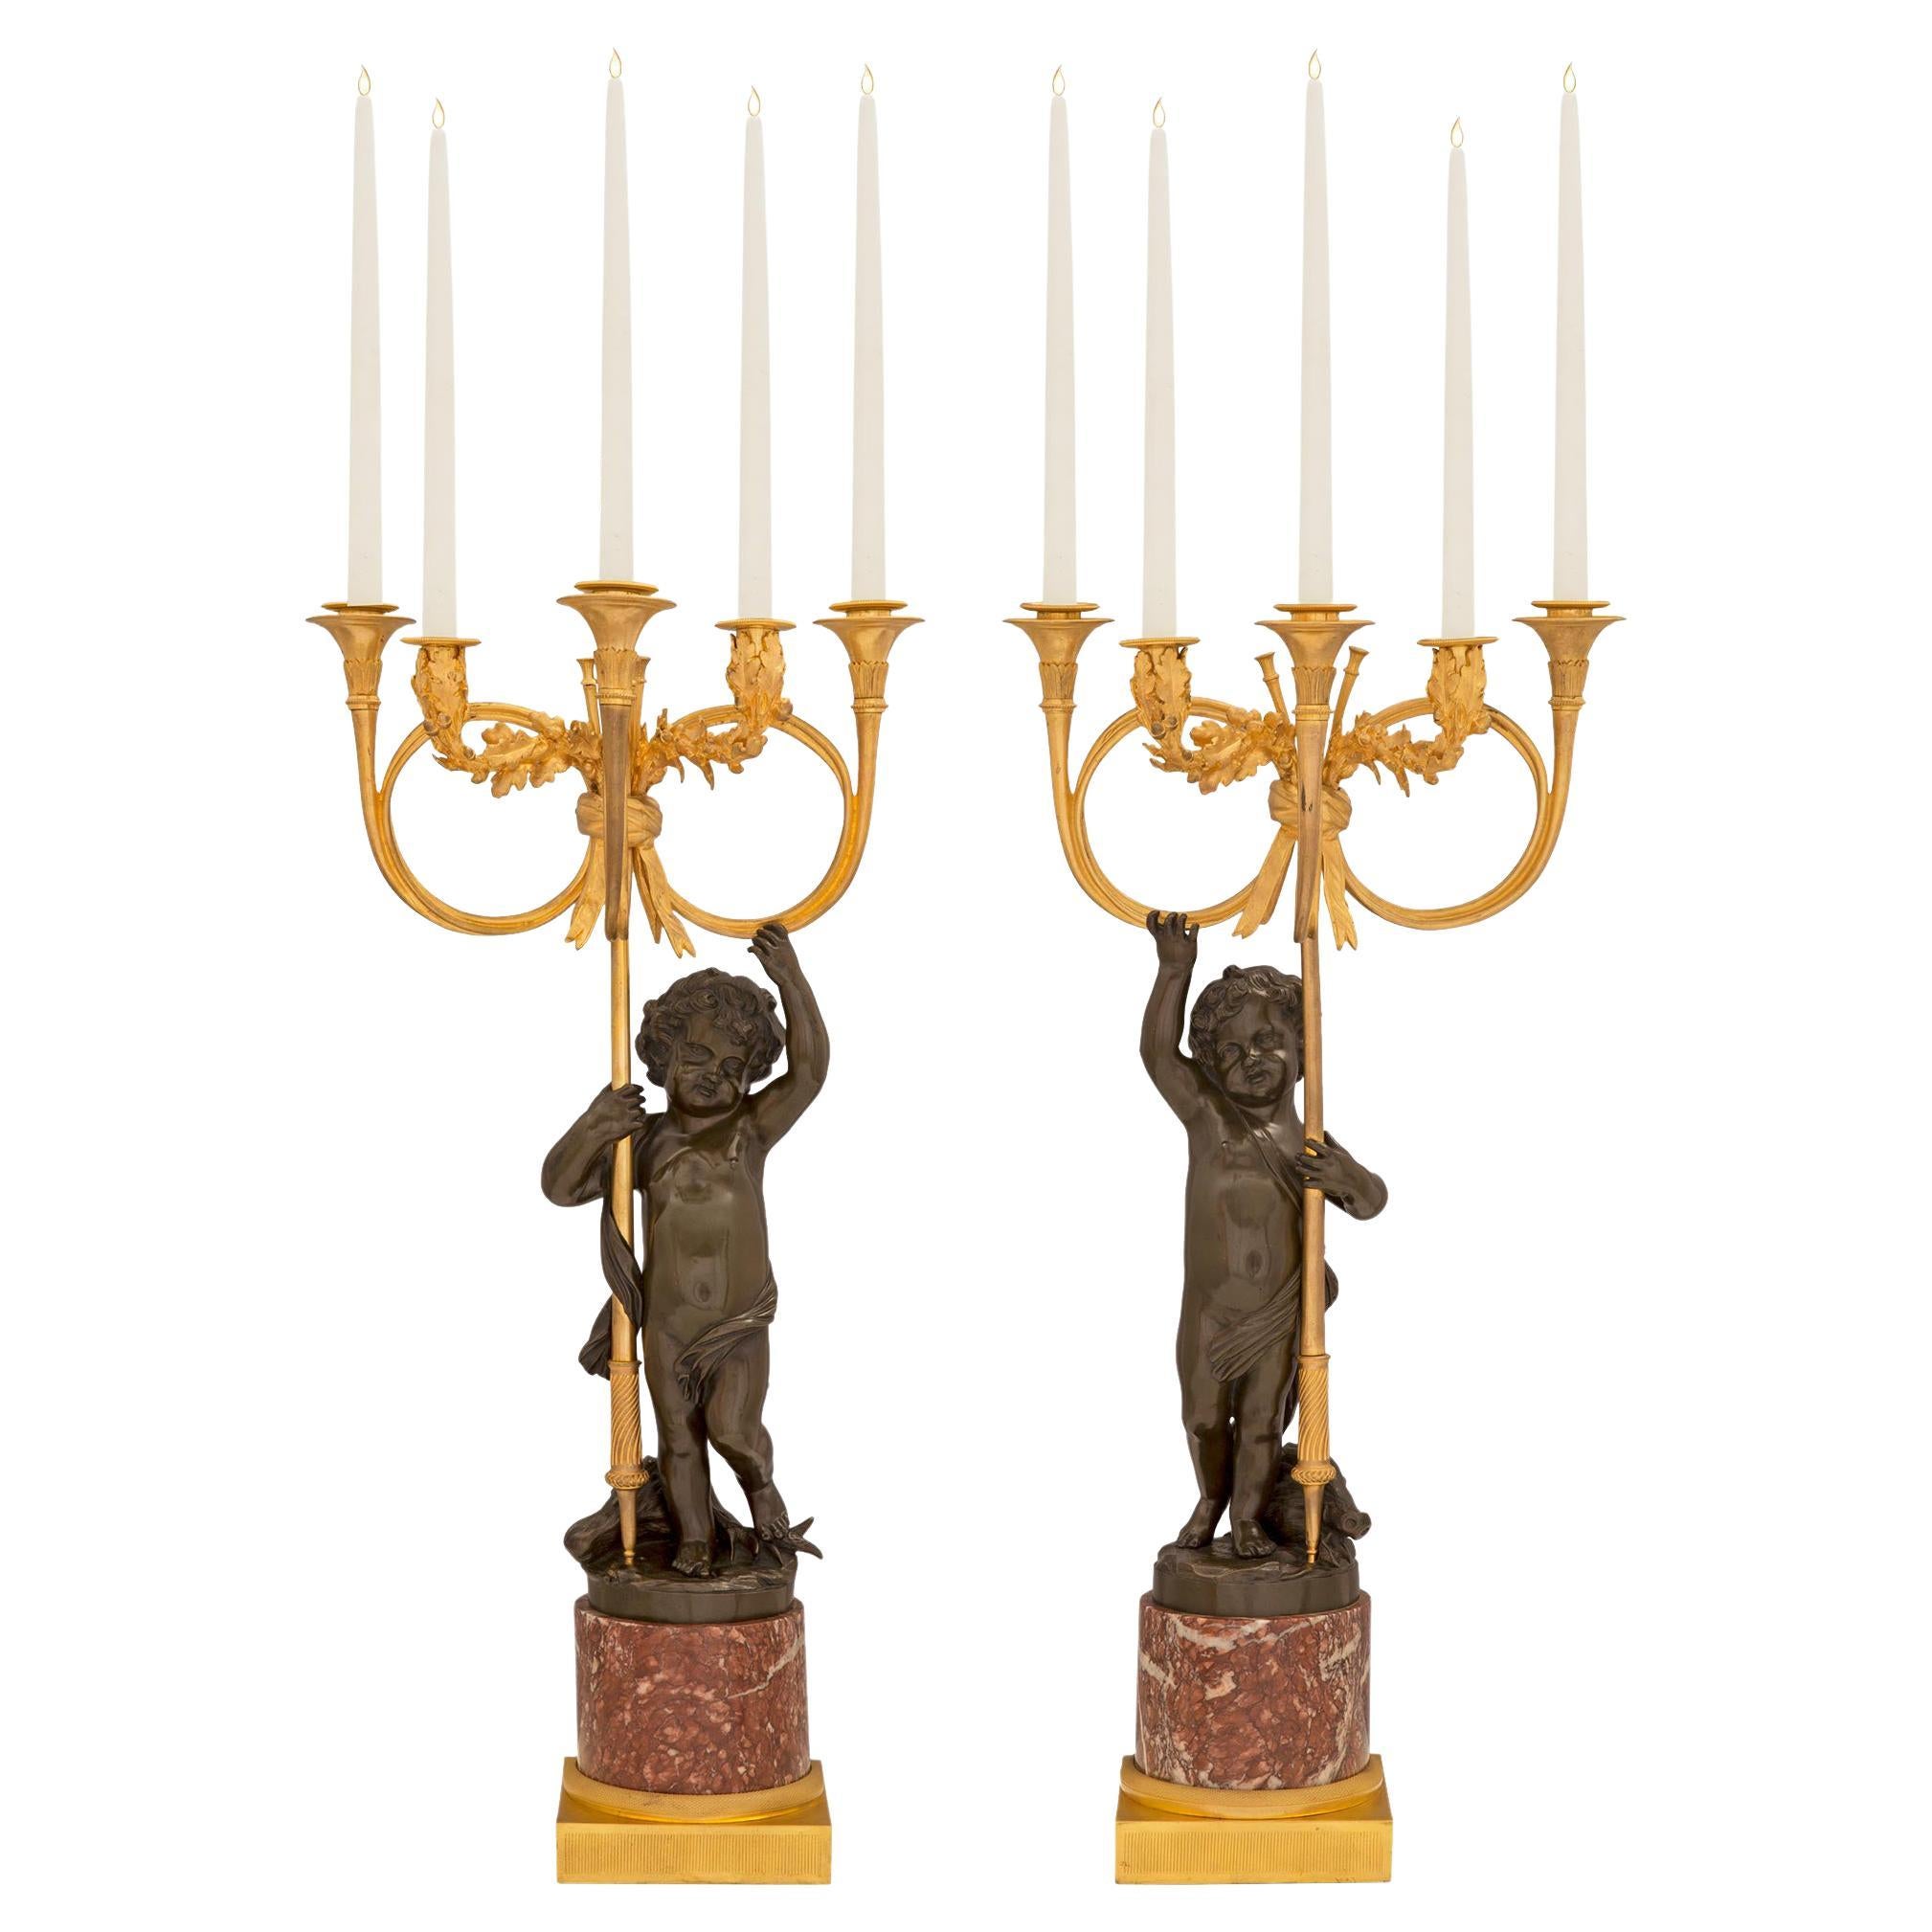 Pair of 19th Century French Louis XVI St. Bronze, Marble, and Ormolu Candelabras For Sale